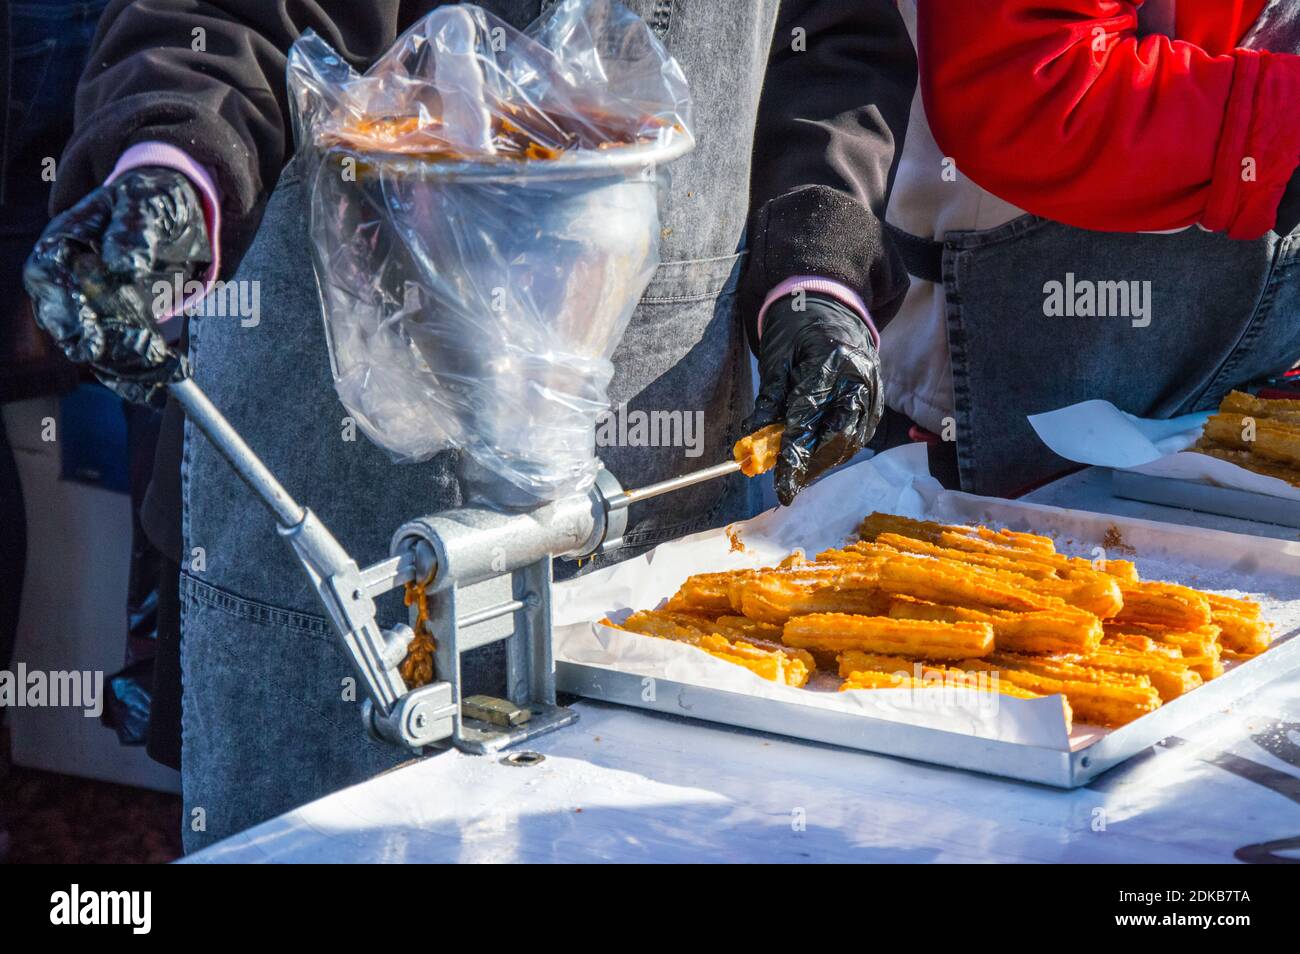 Midsection Of Person Preparing Churros On Table Stock Photo